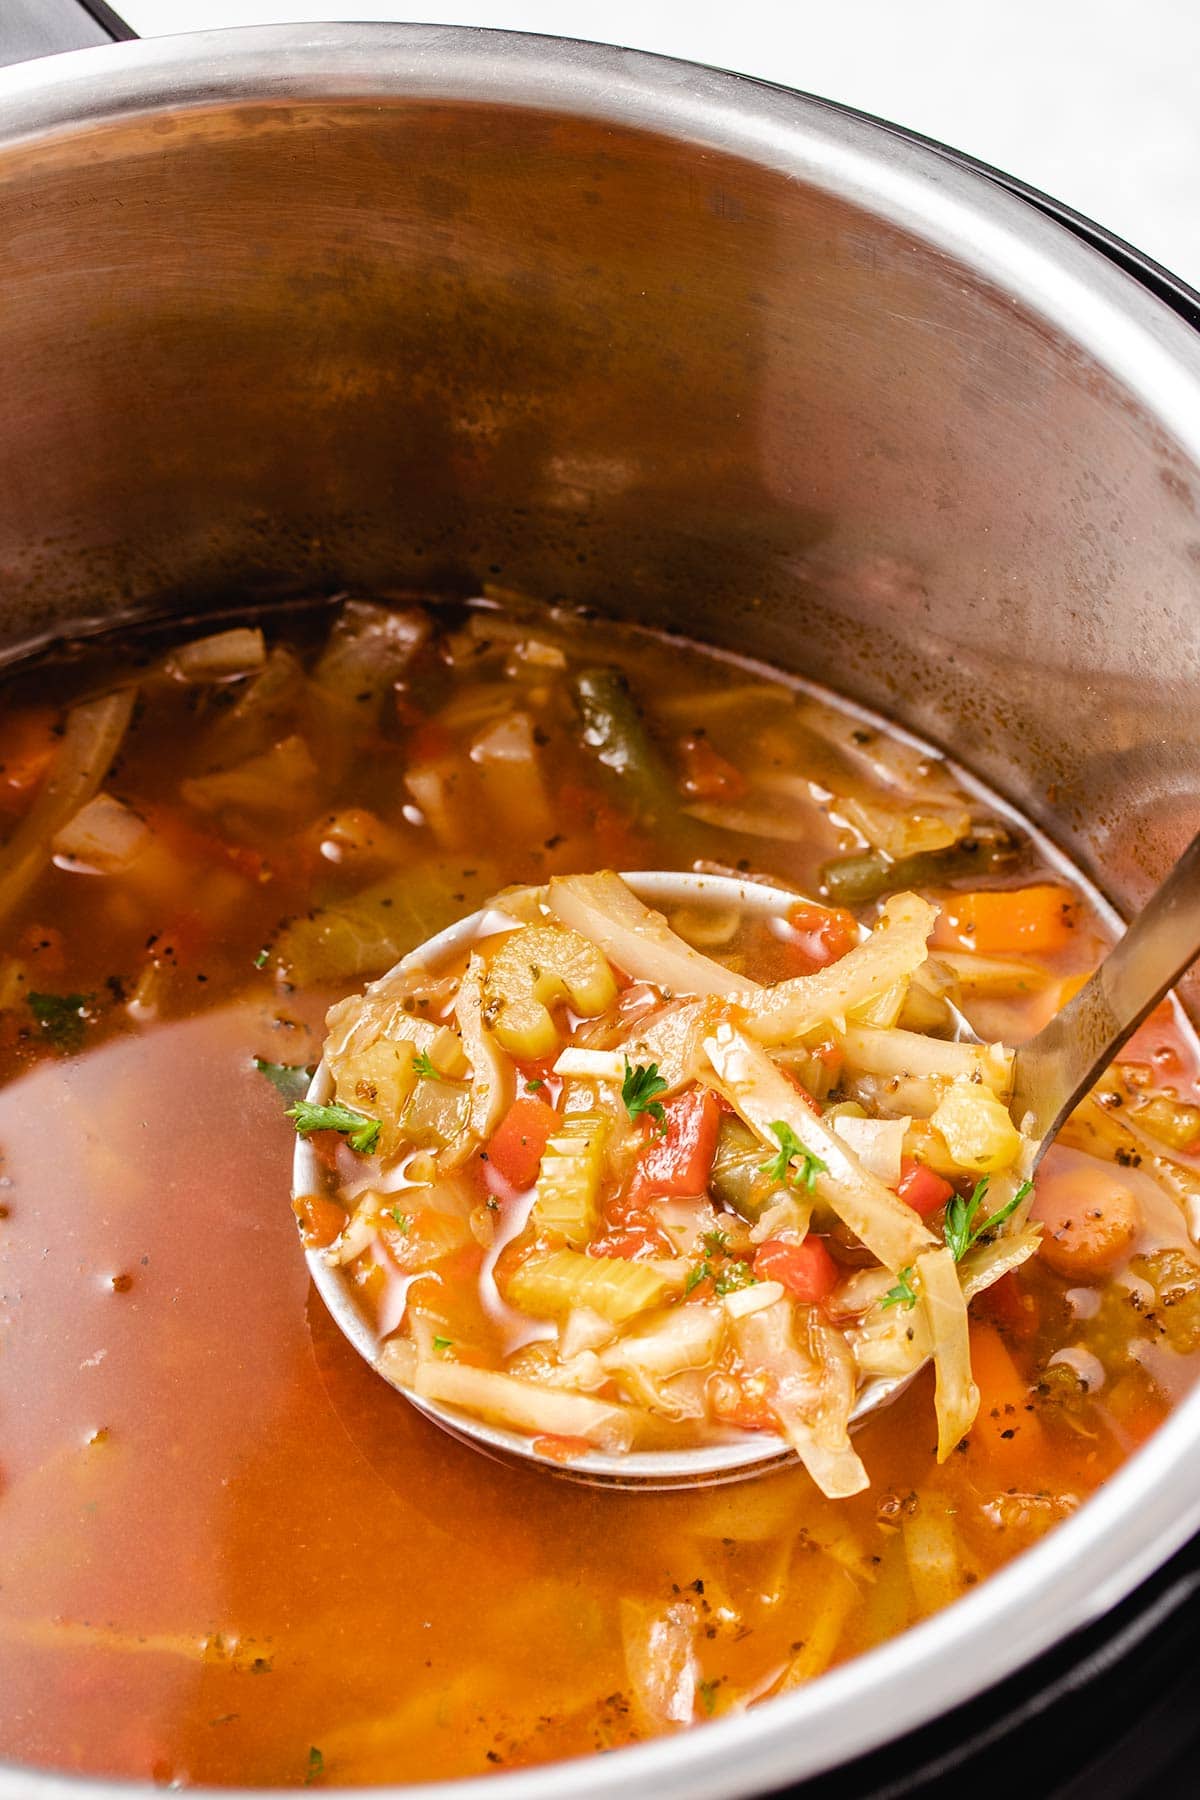 A ladleful of cabbage soup being taken from an Instant Pot.